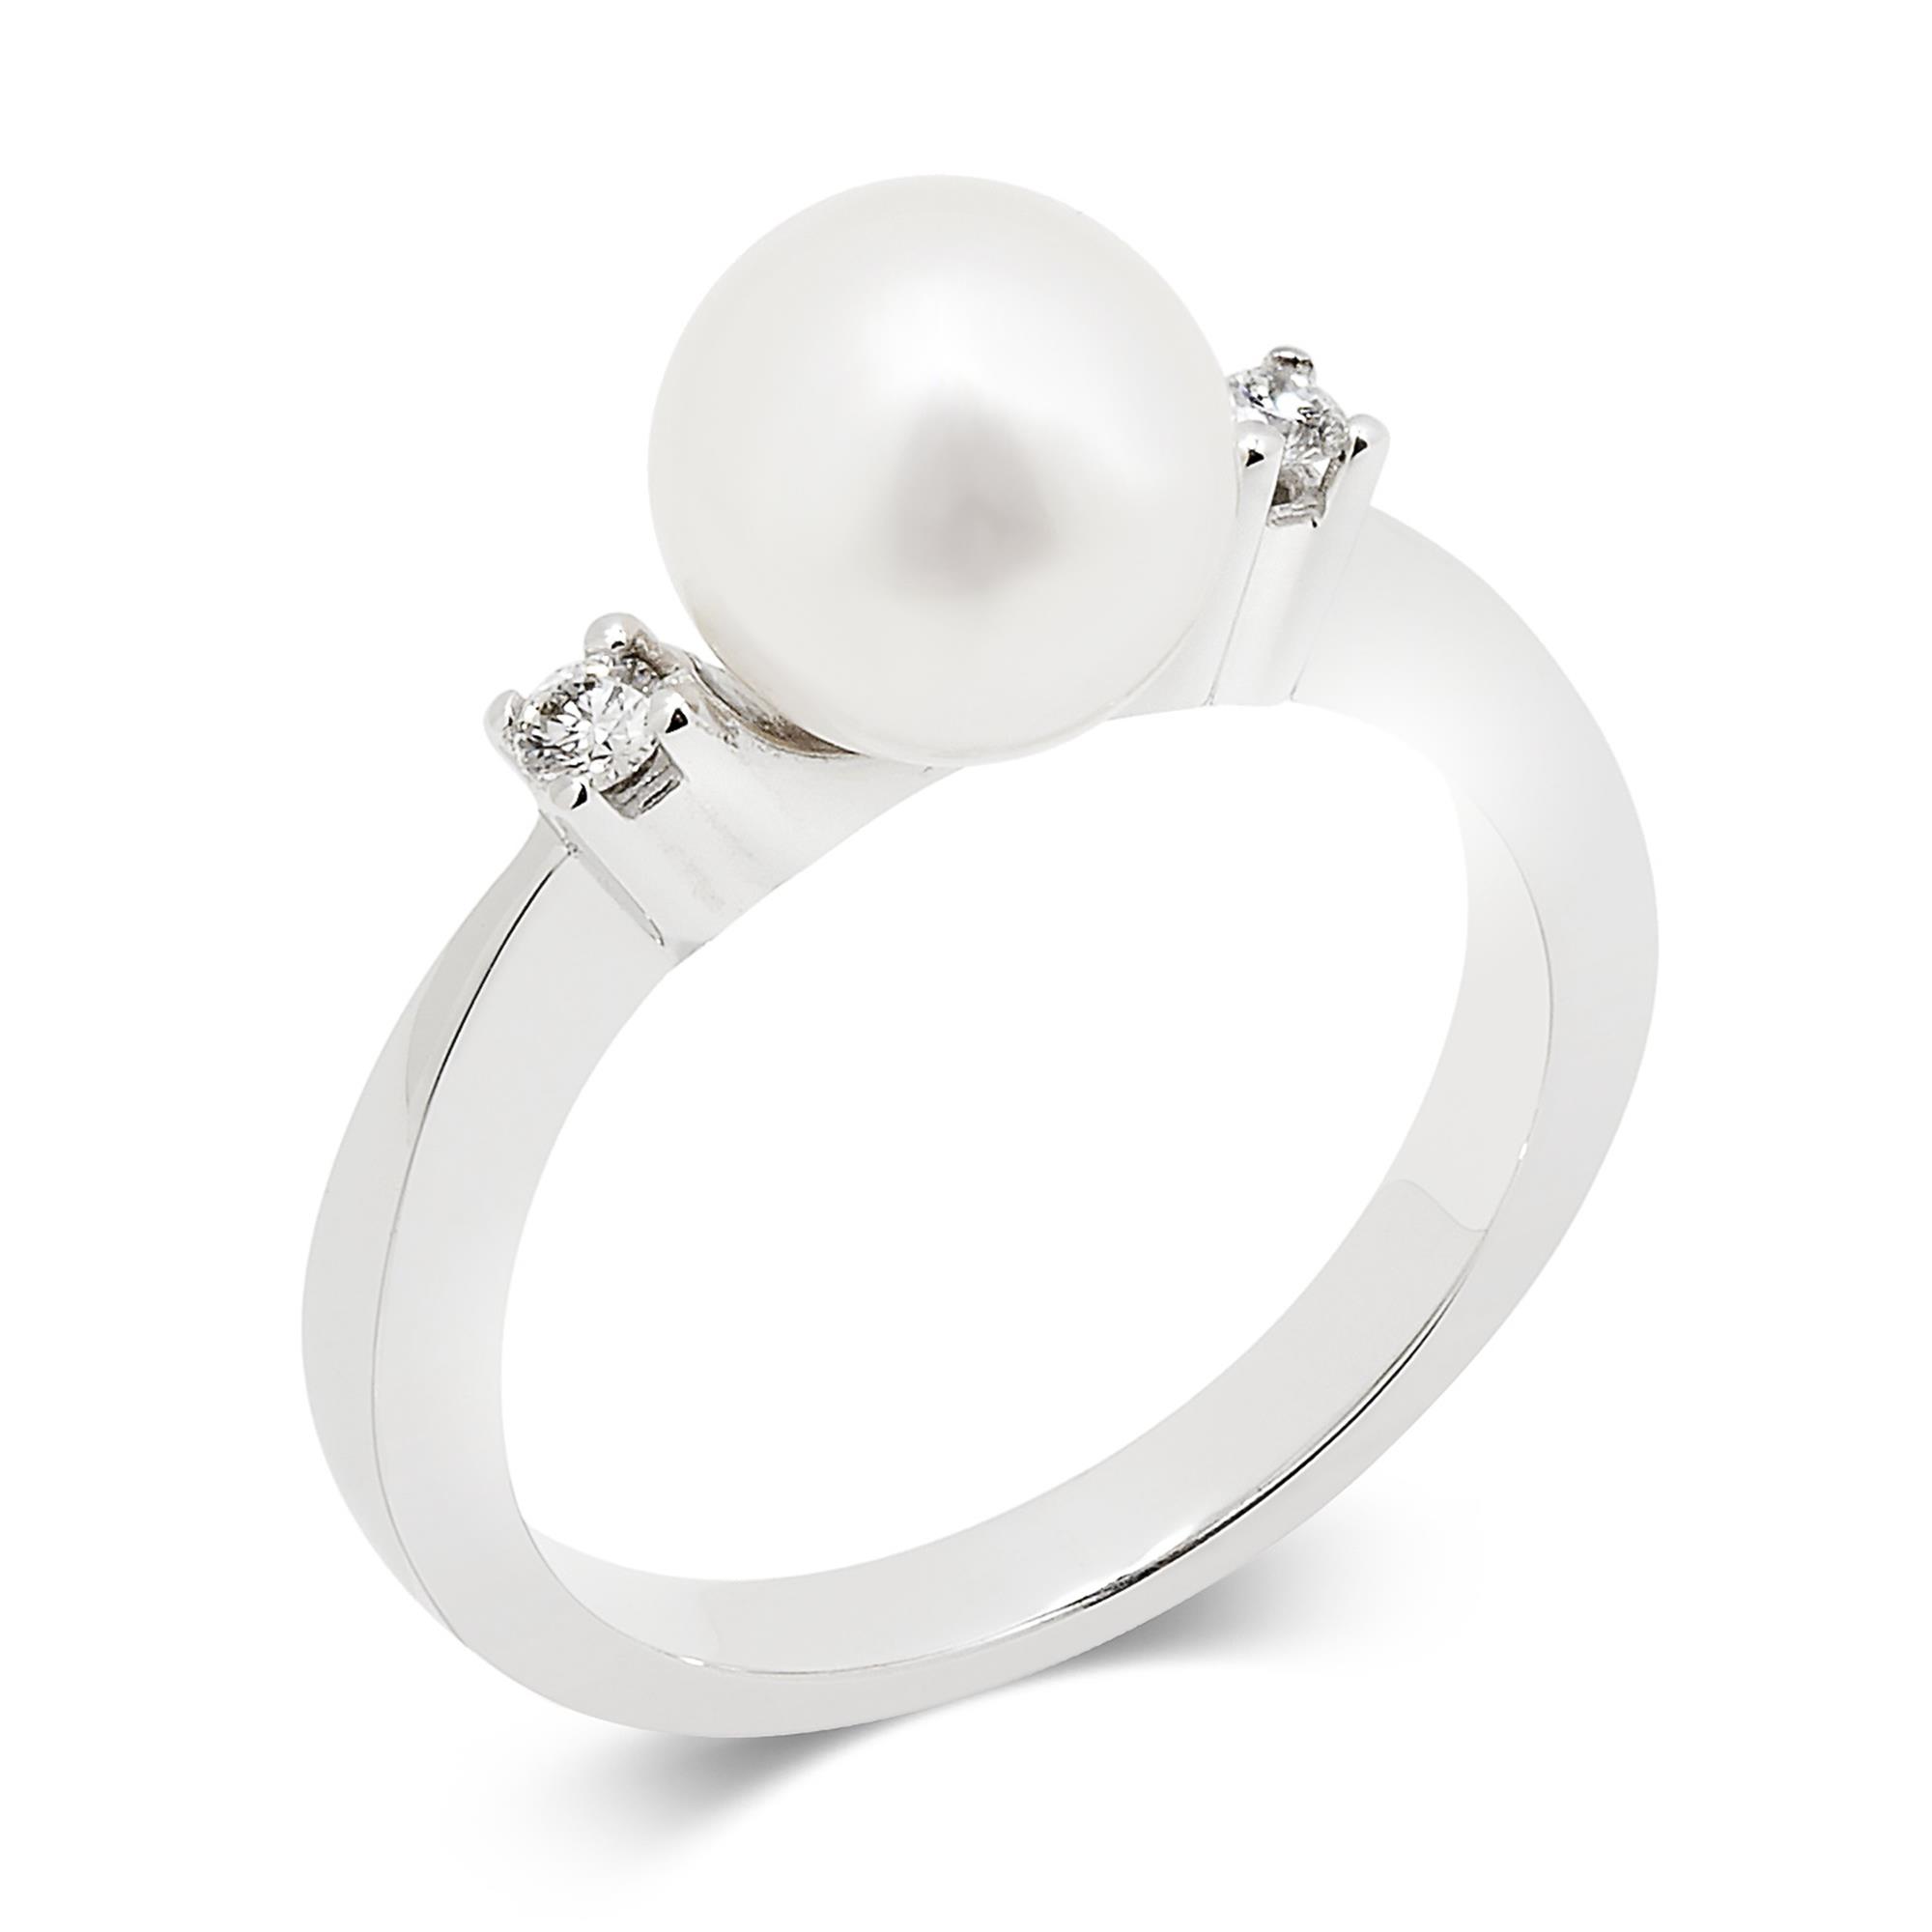 Cultured Pearl and Diamond Dress Ring | Pravins